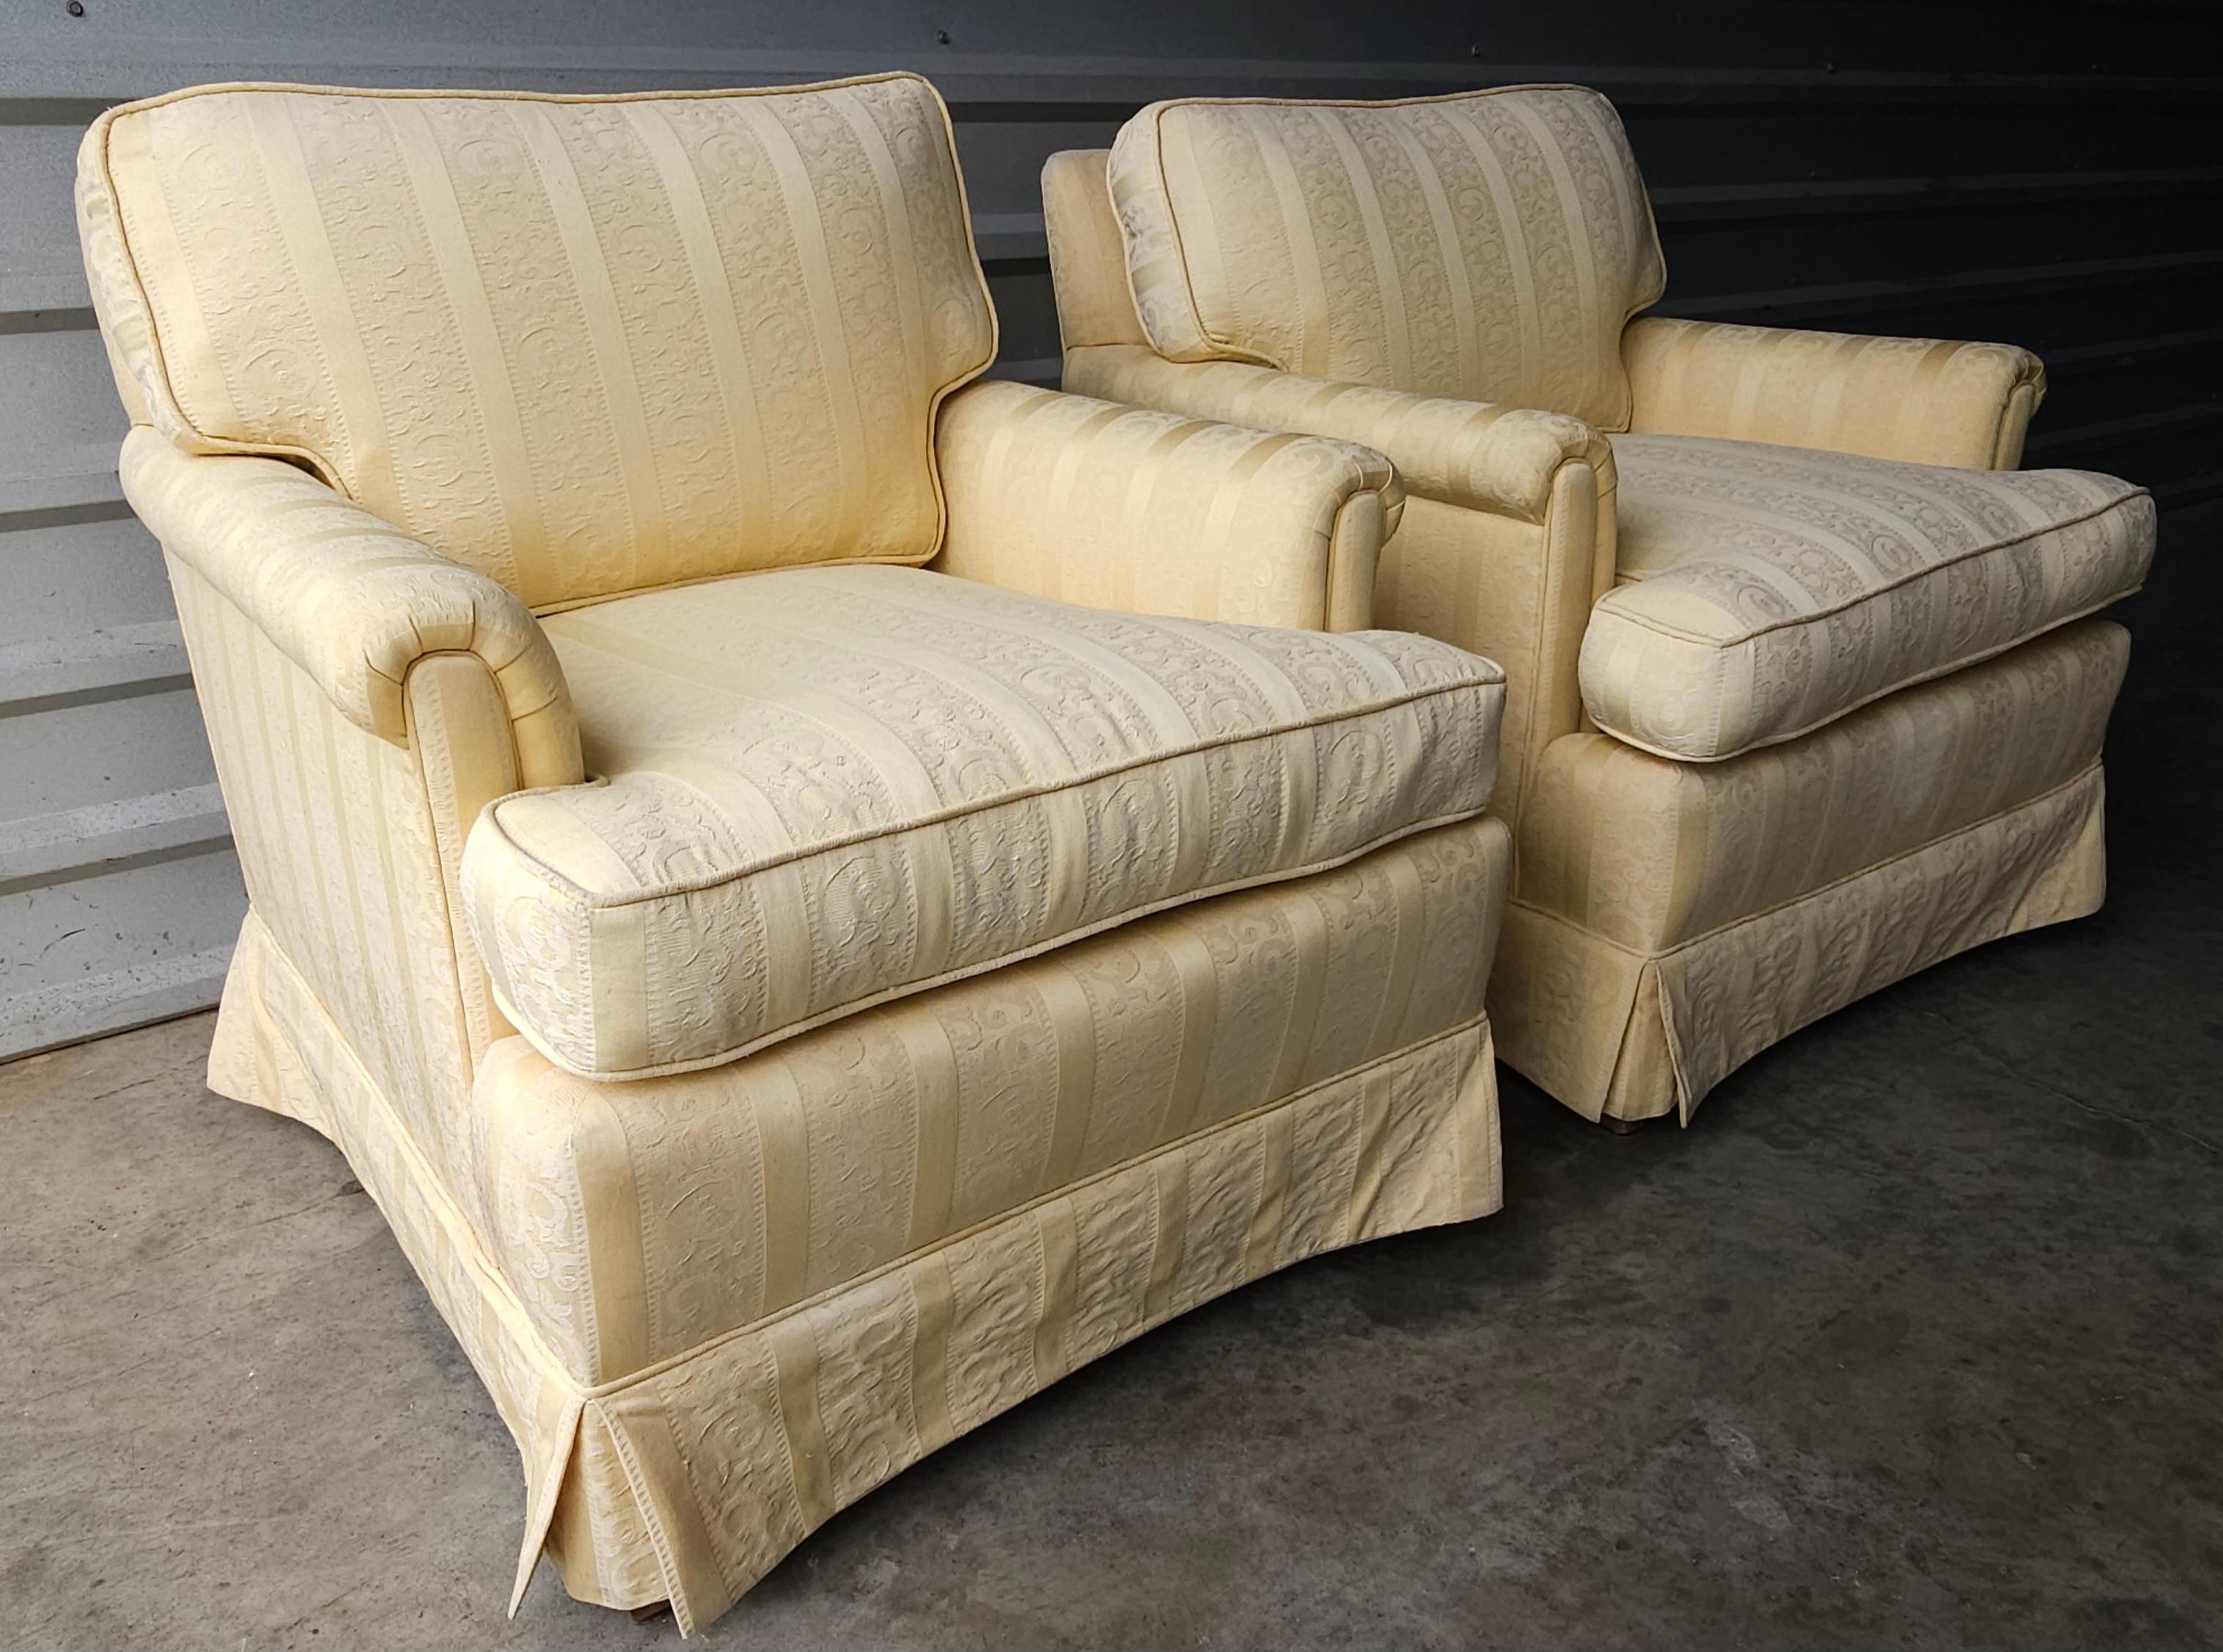 Pair of Mid 20th Century Yellow Upholstered Lounge Chairs For Sale 5